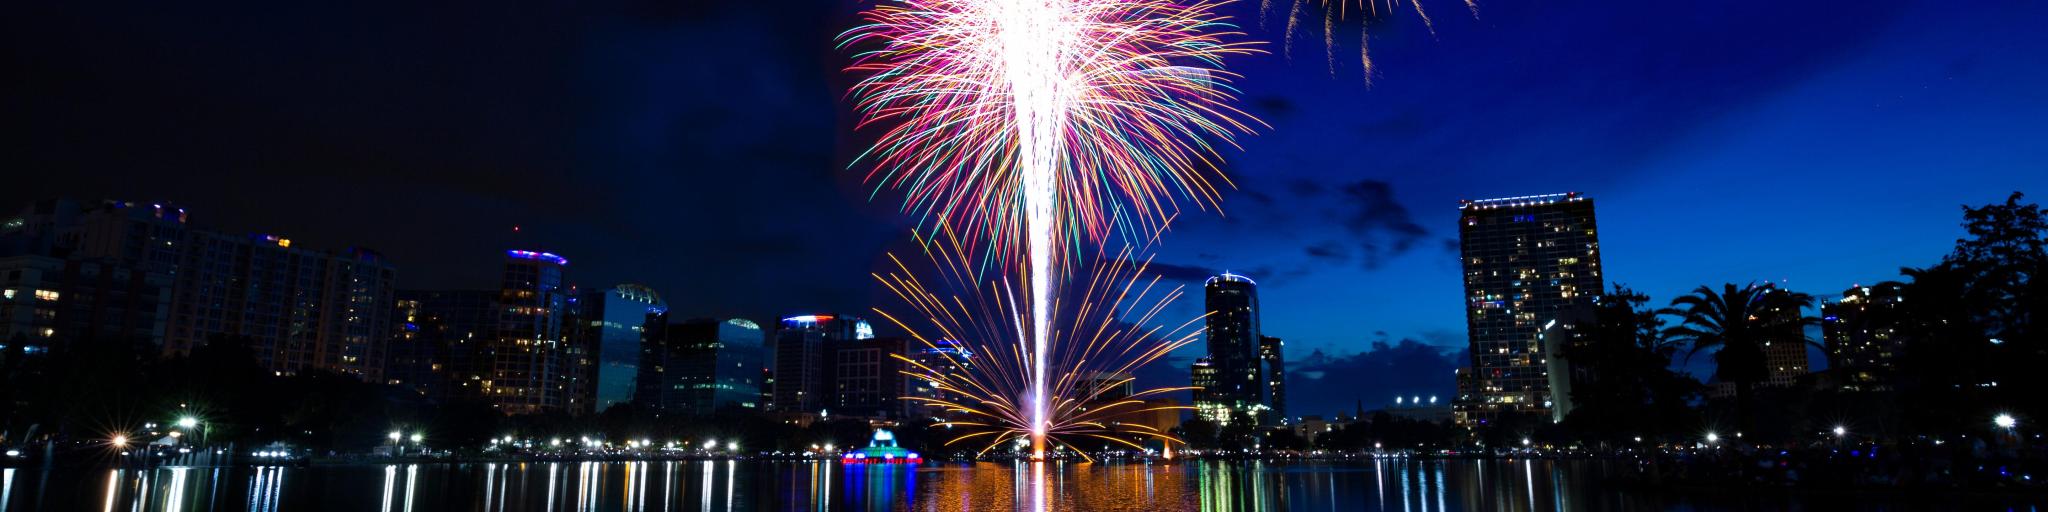 Independence Day in Orlando Florida. Fourth of July Fireworks in Lake Eola, Orlando downtown area.